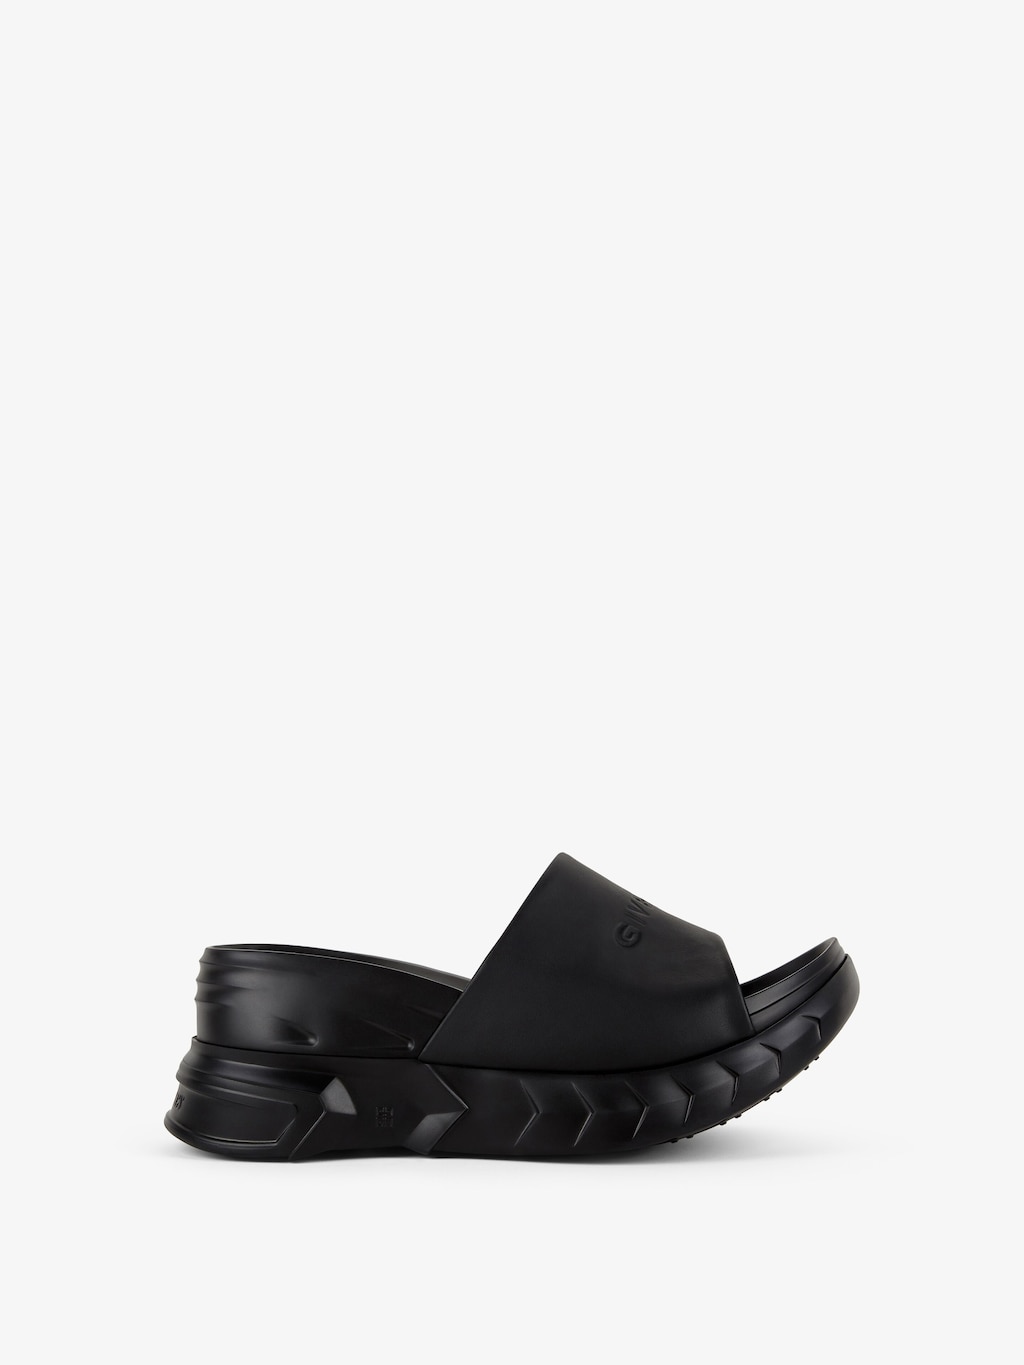 Marshmallow wedge sandals in leather | Givenchy US | Givenchy